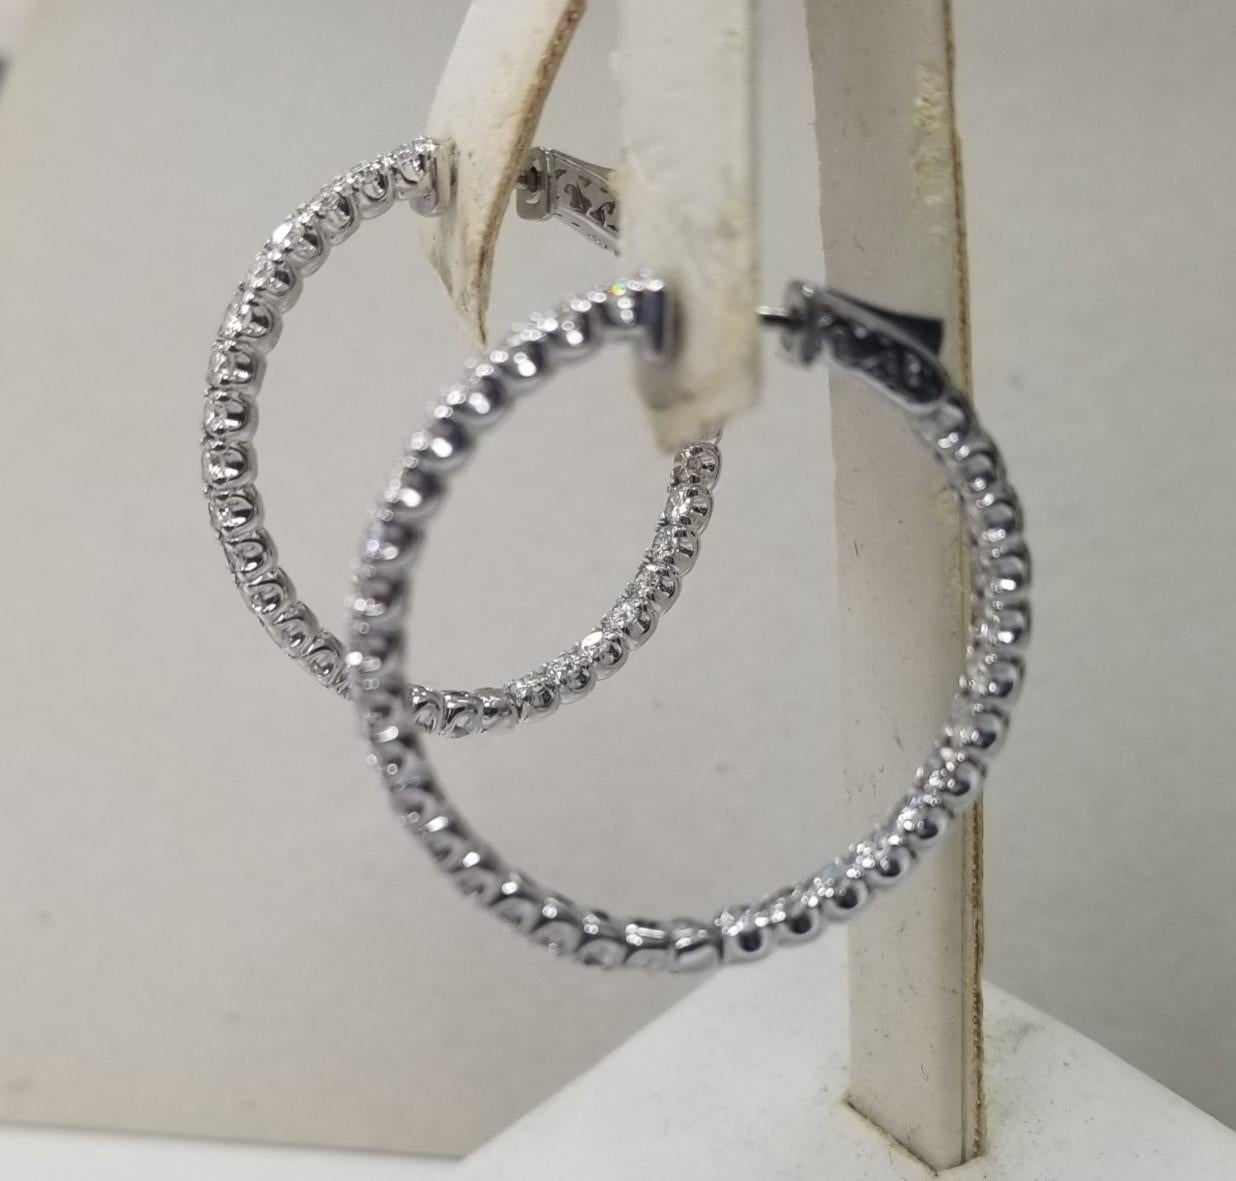 About
14k white gold large 1 1/4 inch in diameter diamond hoop earrings
Specifications:
    main stone: 62 round Diamonds    
    carat total weight: 4.25CTW
    color: G
    clarity: VS
    metal: 14K WHITE GOLD
    type: HOOP EARRINGS
    weight: